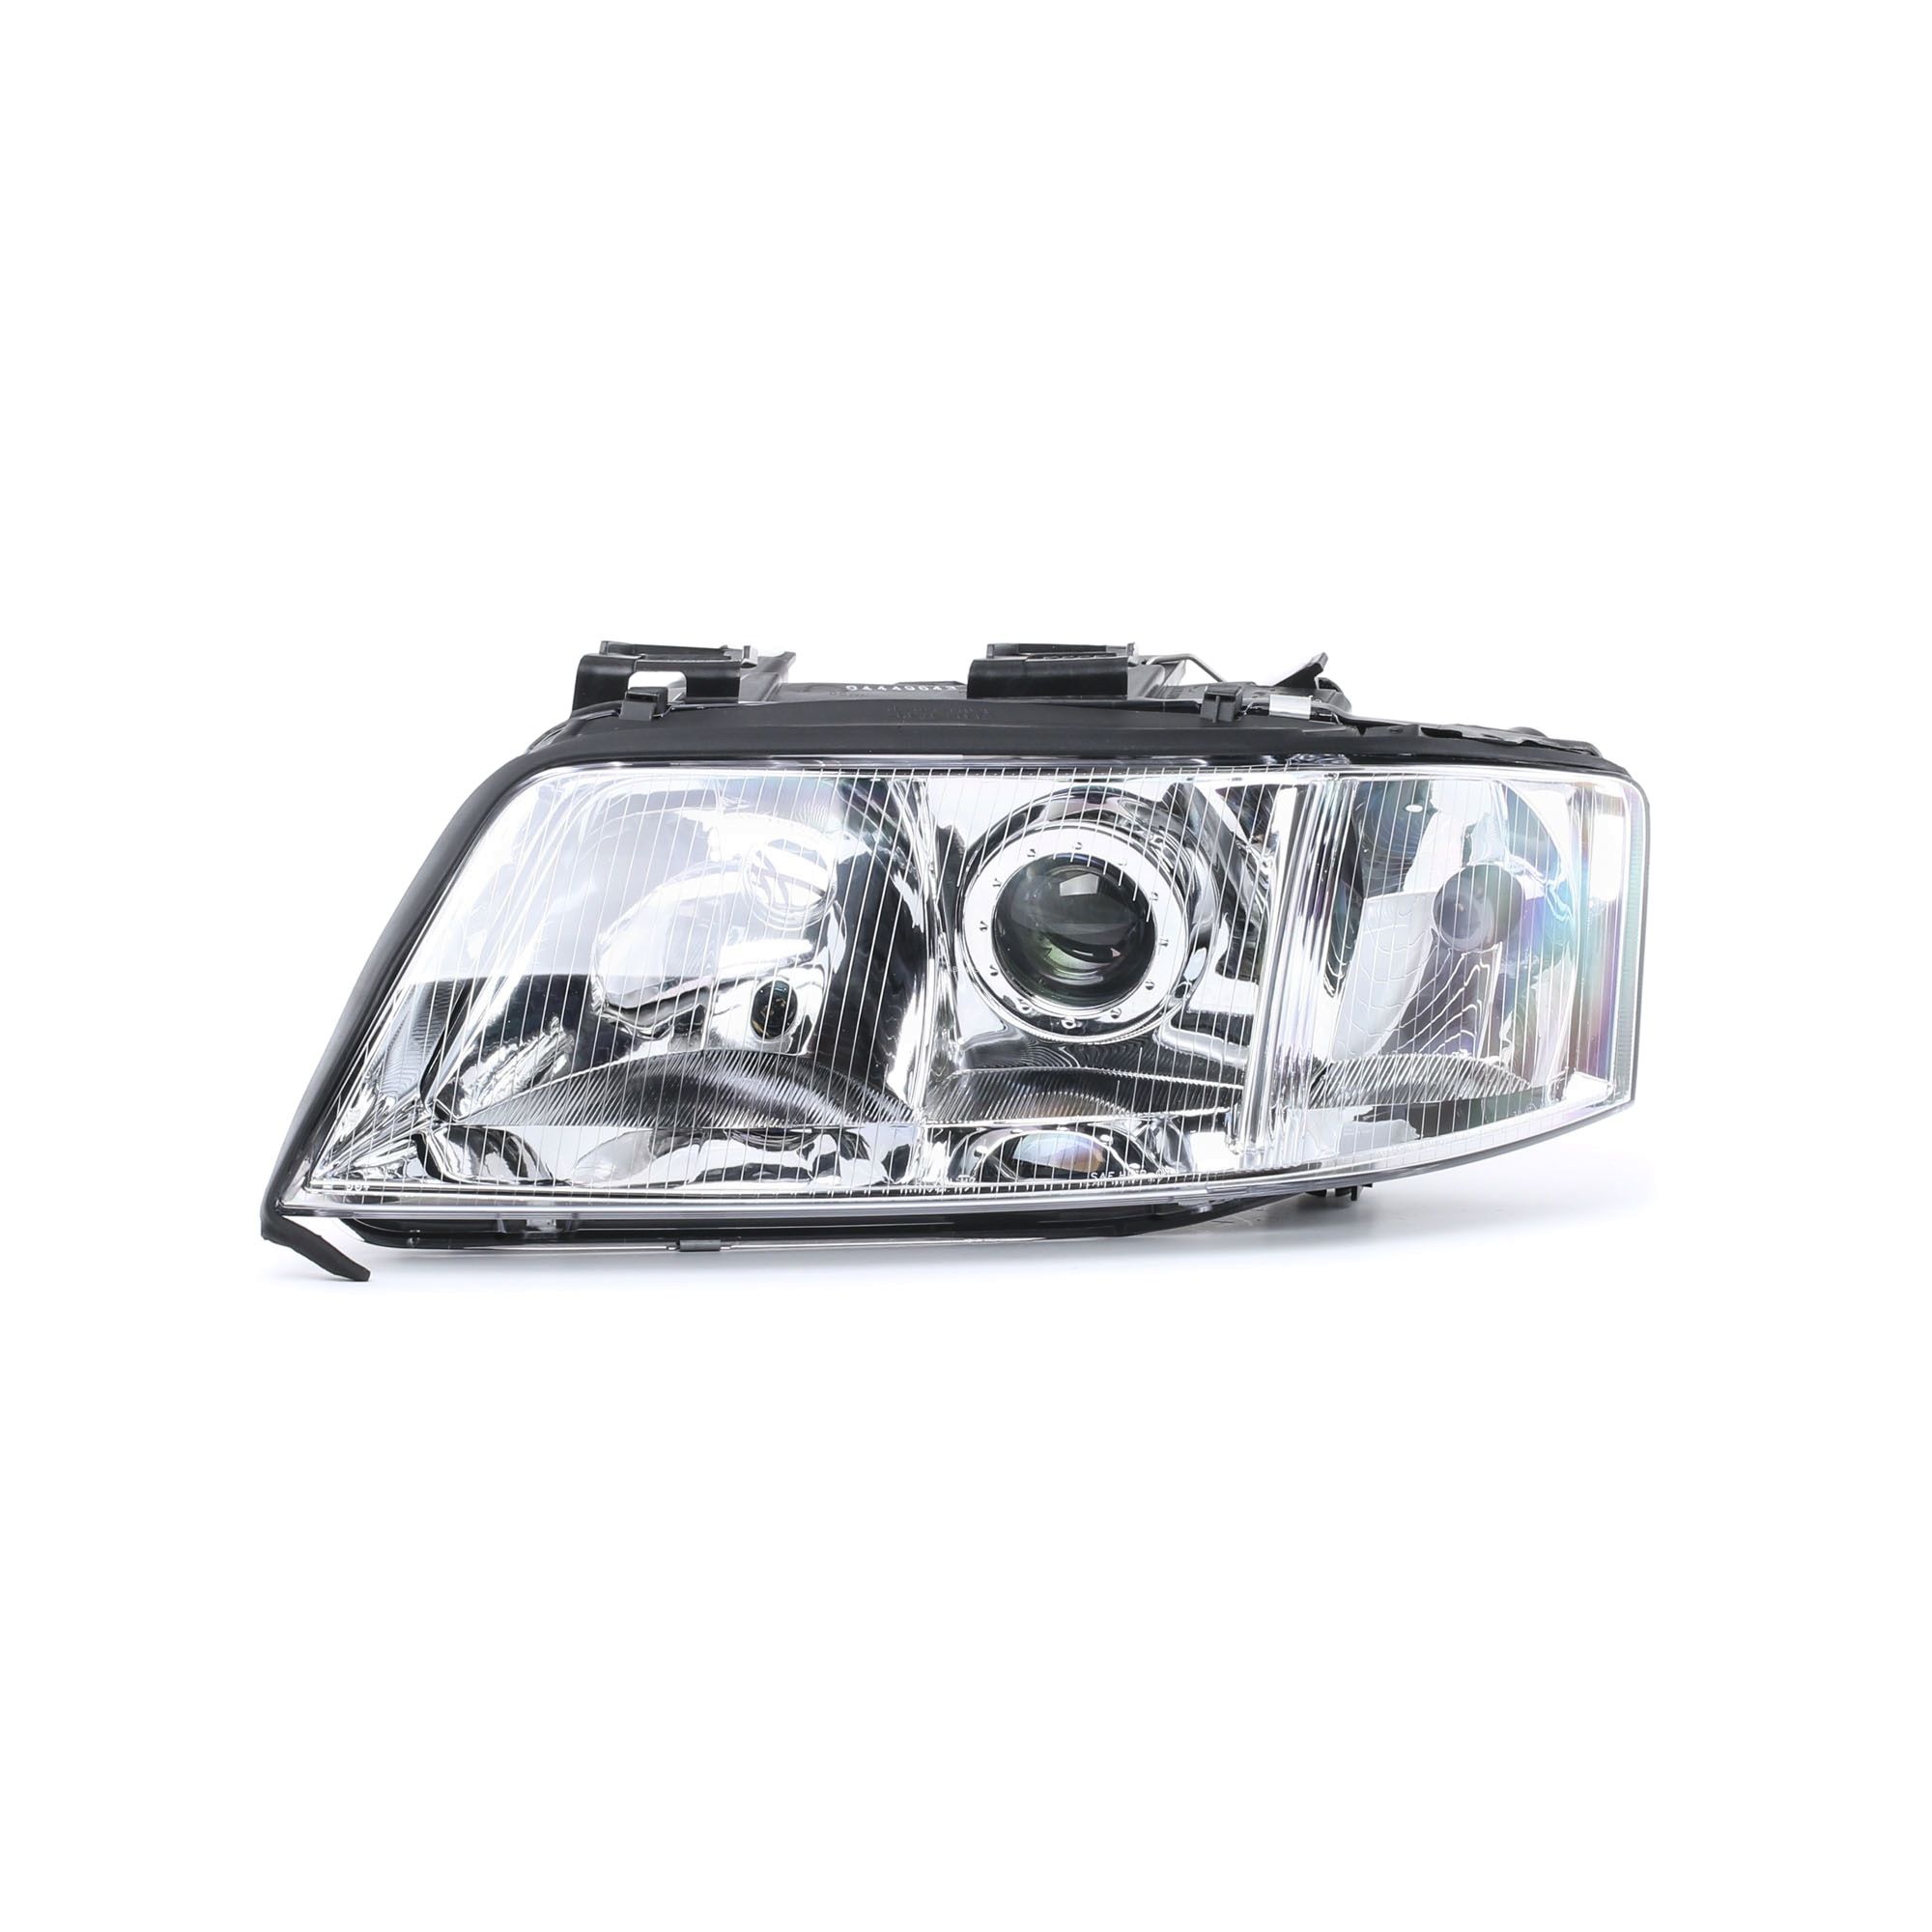 441-1134L-LD-EM ABAKUS Headlight AUDI Left, H1, H7, Crystal clear, with indicator, for right-hand traffic, without motor for headlamp levelling, P14.5s, PX26d